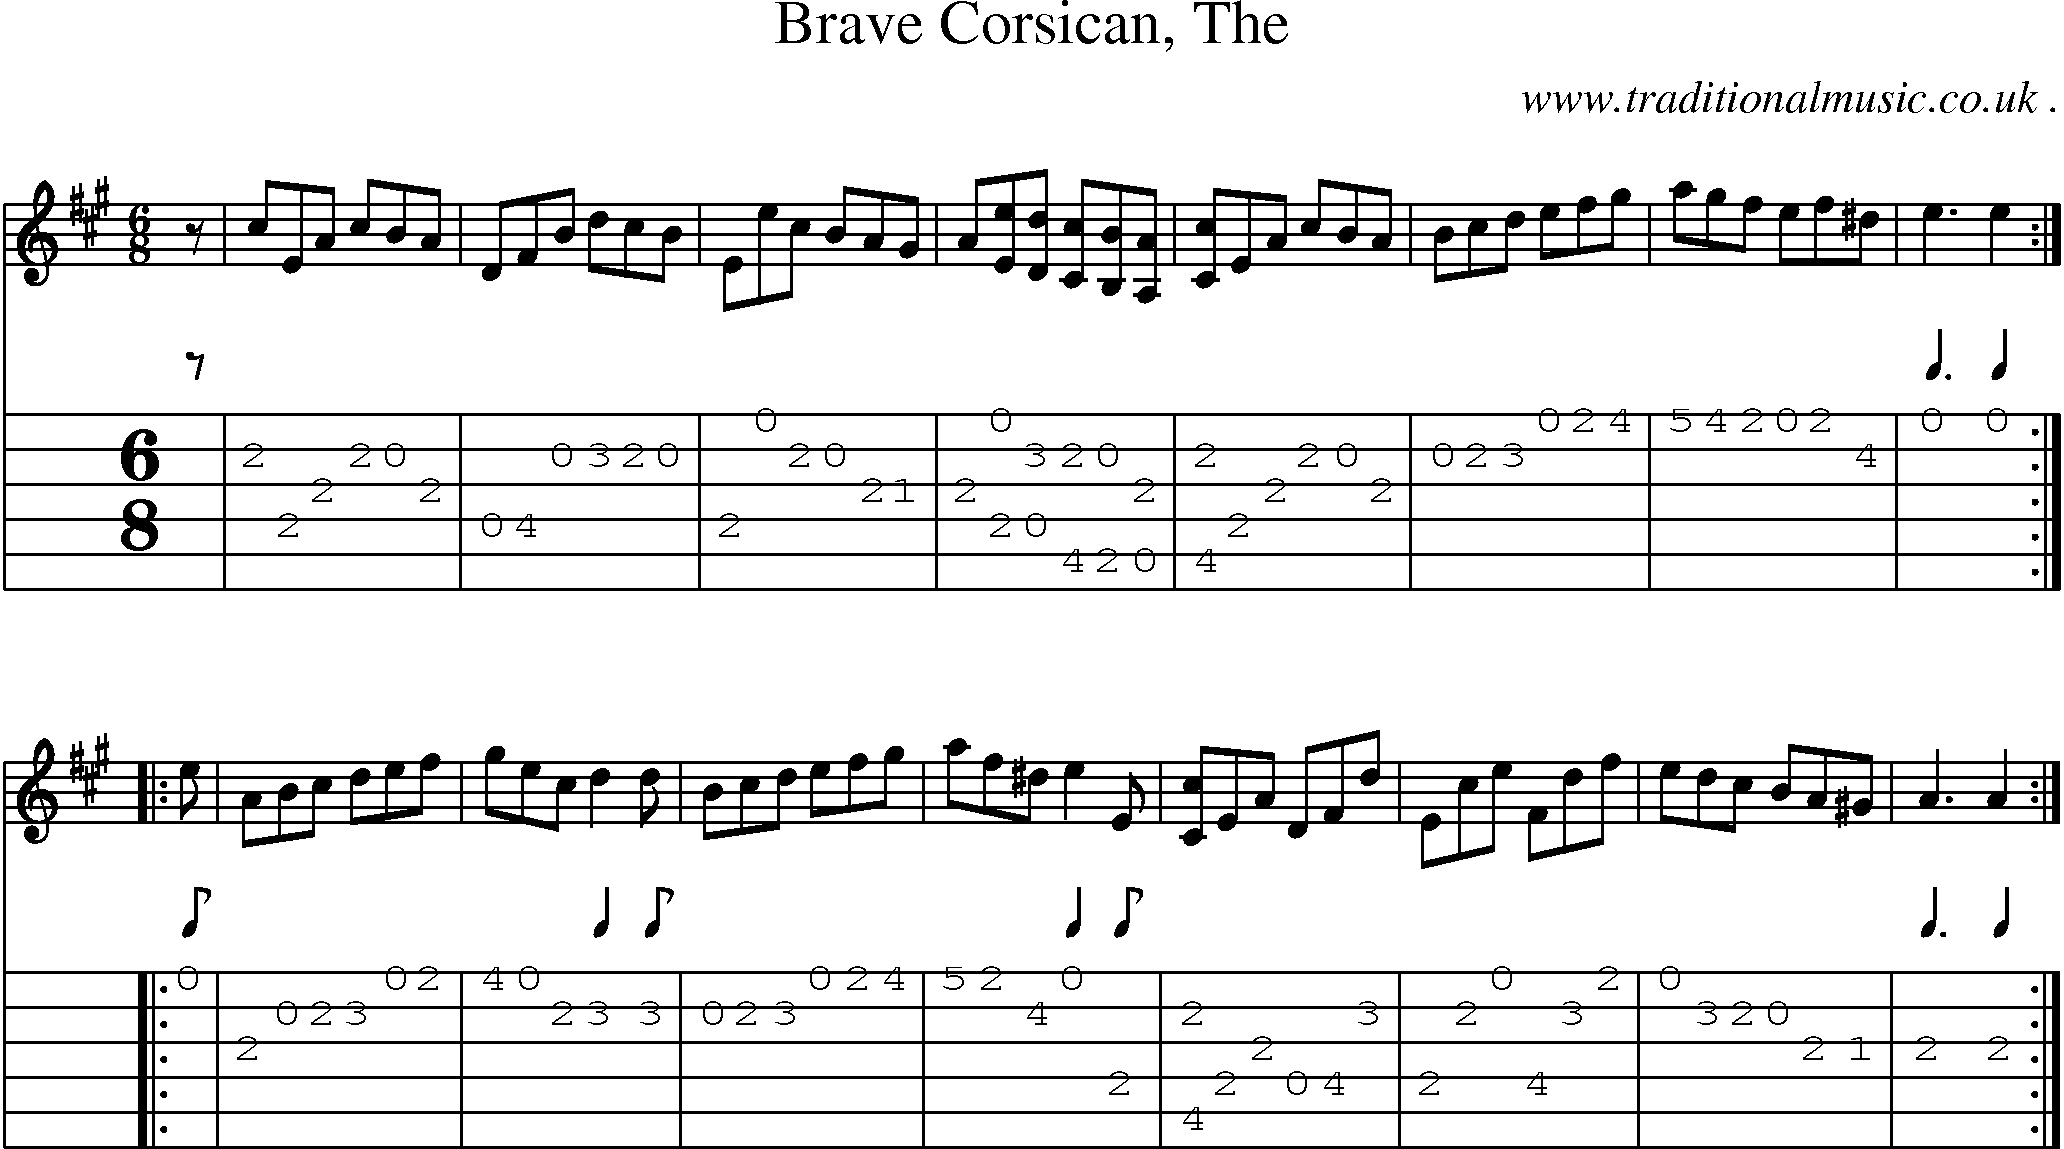 Sheet-music  score, Chords and Guitar Tabs for Brave Corsican The